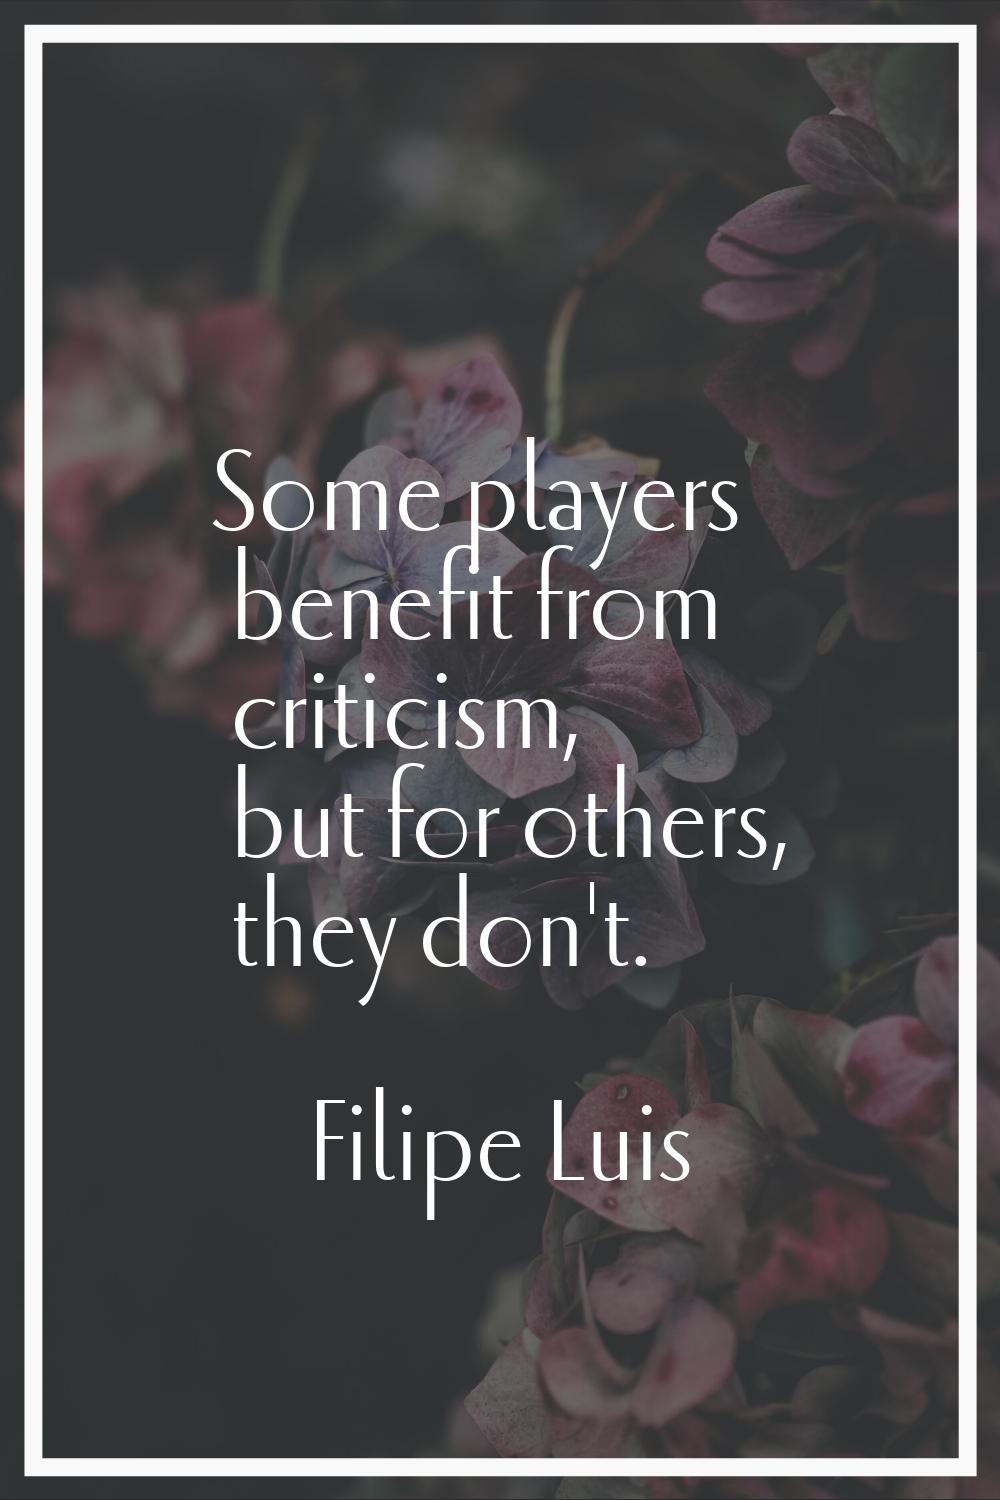 Some players benefit from criticism, but for others, they don't.